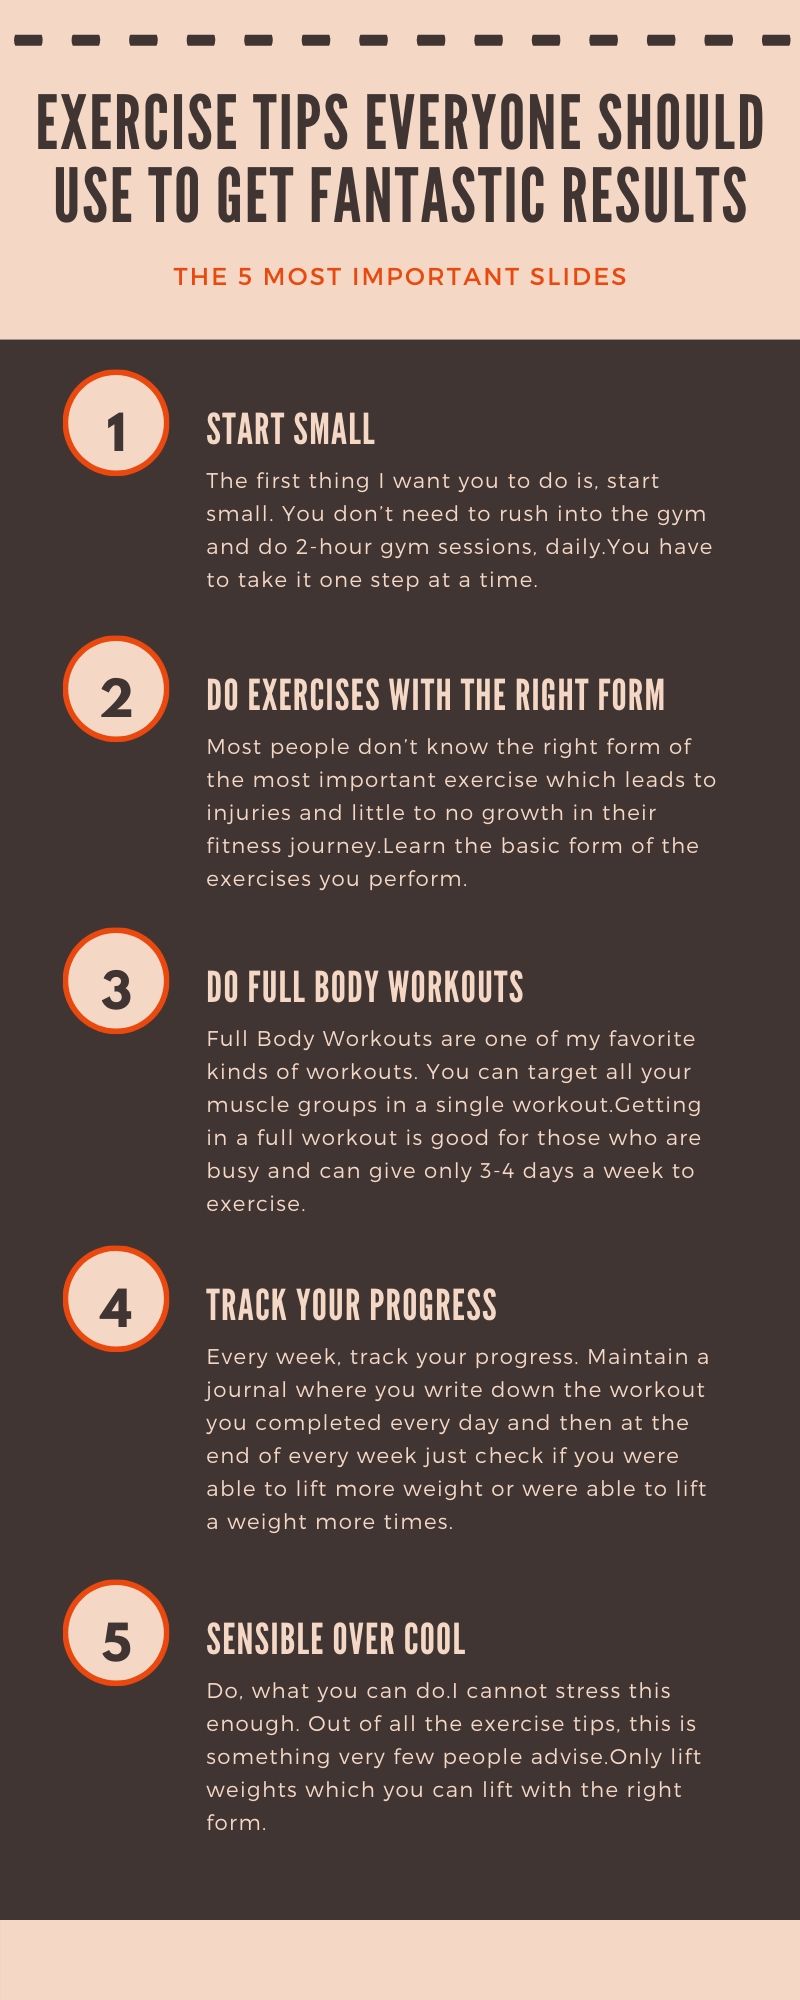 Exercise Tips everyone should use to get Fantastic results